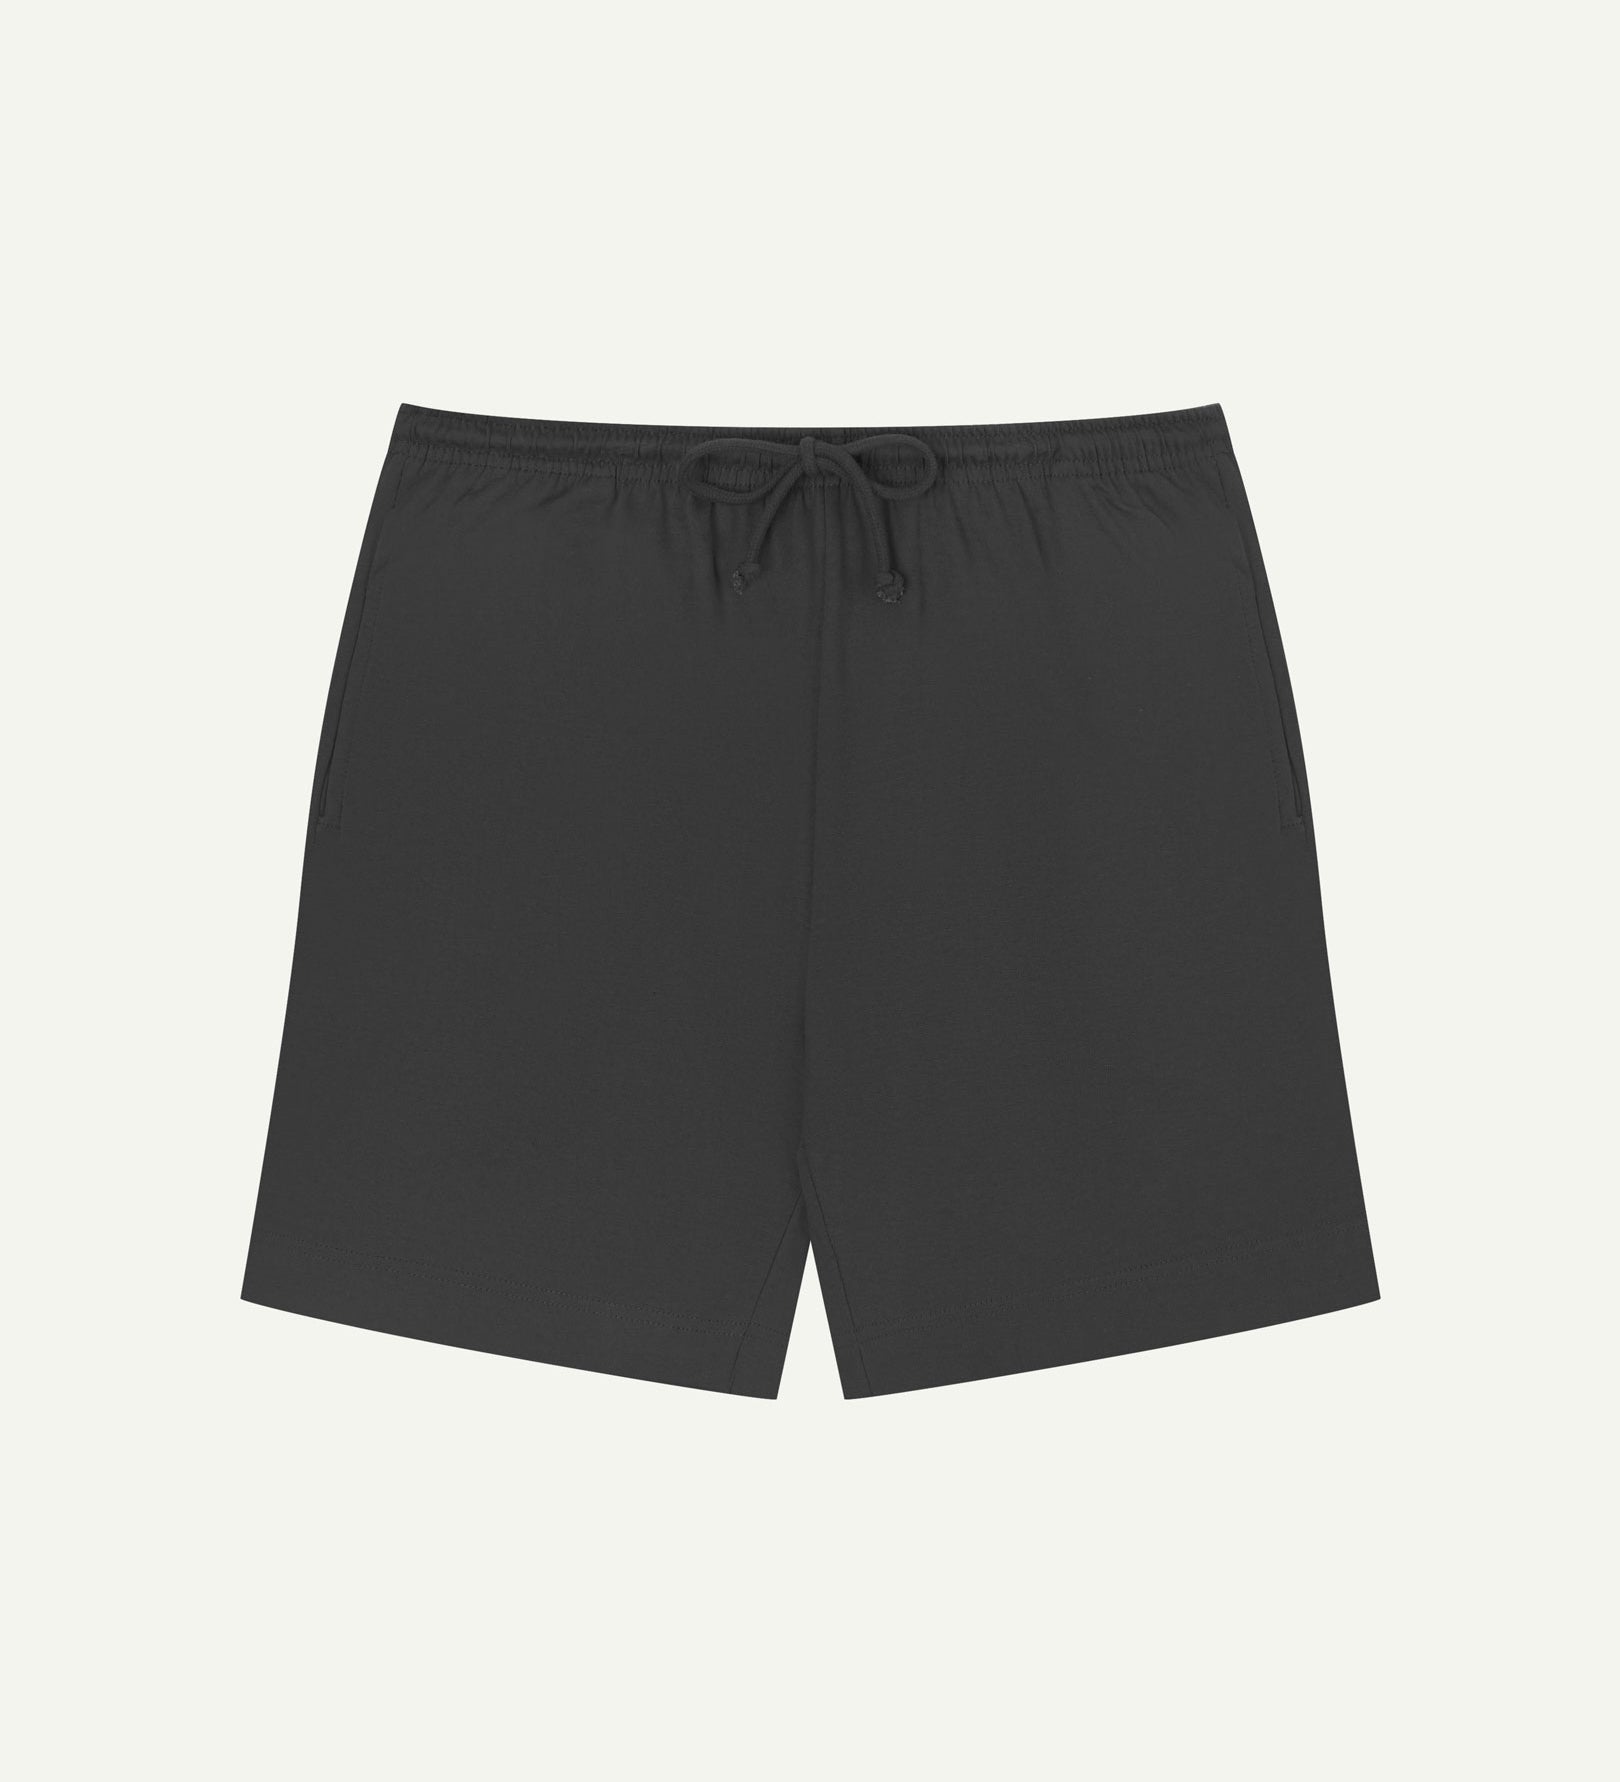 Front view of faded black organic cotton 7007 men's shorts by Uskees against white background. Clear view of drawstring waist.